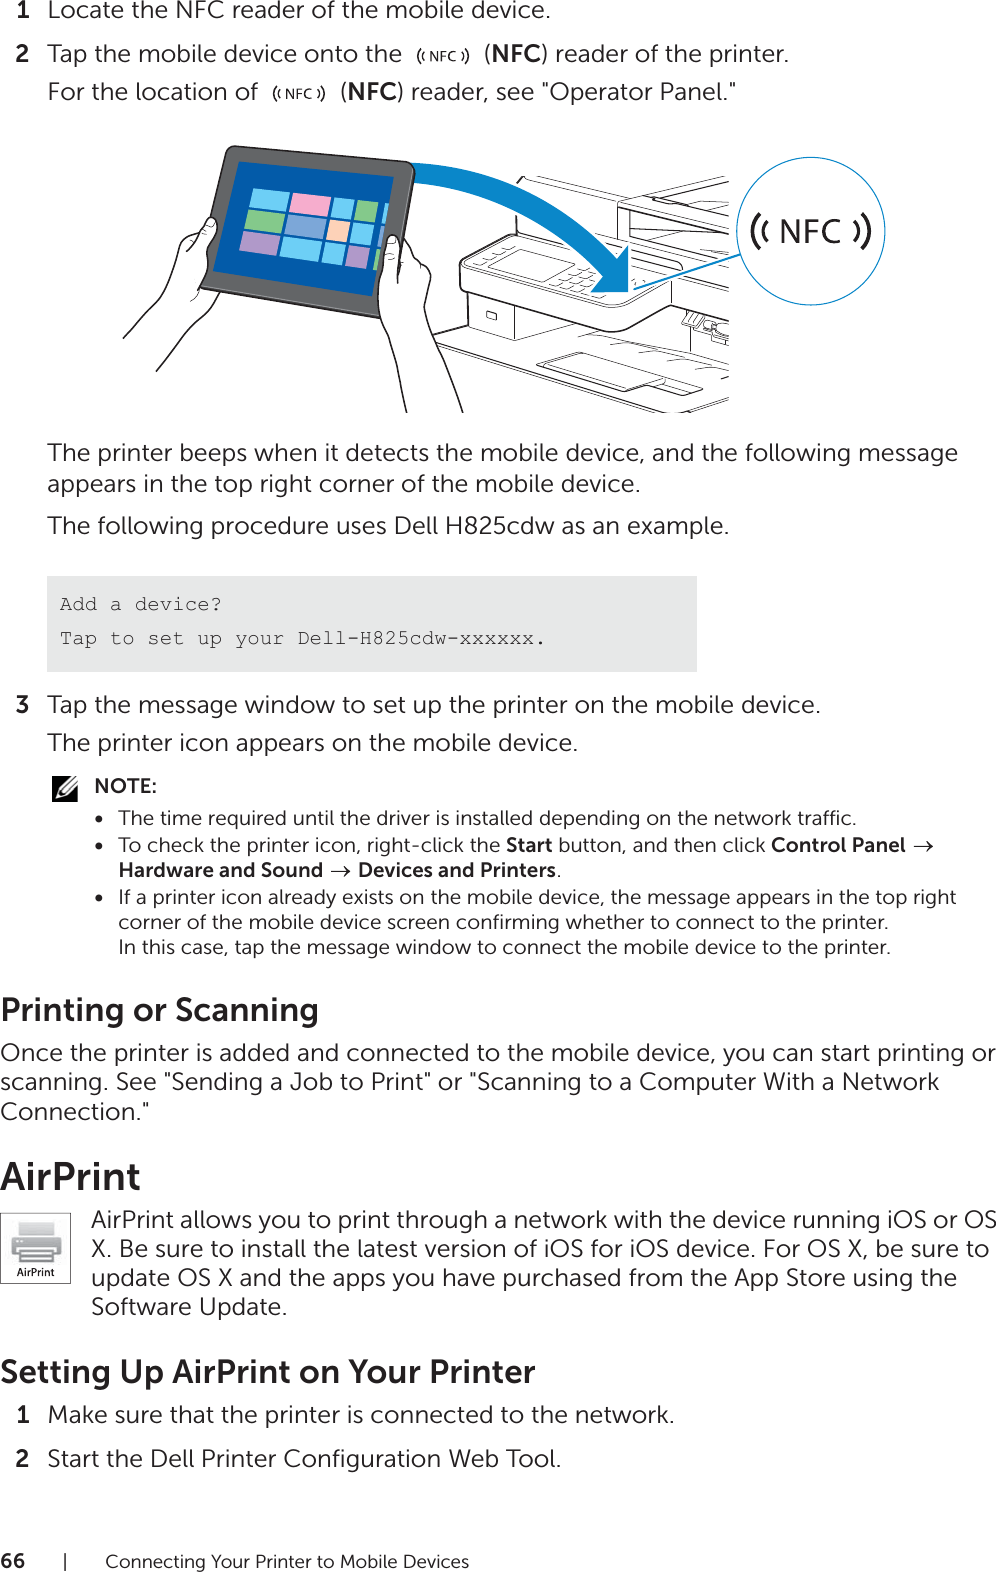 66| Connecting Your Printer to Mobile Devices1Locate the NFC reader of the mobile device.2Tap the mobile device onto the   (NFC) reader of the printer.For the location of   (NFC) reader, see &quot;Operator Panel.&quot;The printer beeps when it detects the mobile device, and the following message appears in the top right corner of the mobile device.The following procedure uses Dell H825cdw as an example.3Tap the message window to set up the printer on the mobile device.The printer icon appears on the mobile device.NOTE:•The time required until the driver is installed depending on the network traffic.•To check the printer icon, right-click the Start button, and then click Control Panel  Hardware and Sound  Devices and Printers.•If a printer icon already exists on the mobile device, the message appears in the top right corner of the mobile device screen confirming whether to connect to the printer.In this case, tap the message window to connect the mobile device to the printer.Printing or ScanningOnce the printer is added and connected to the mobile device, you can start printing or scanning. See &quot;Sending a Job to Print&quot; or &quot;Scanning to a Computer With a Network Connection.&quot;AirPrintAirPrint allows you to print through a network with the device running iOS or OS X. Be sure to install the latest version of iOS for iOS device. For OS X, be sure to update OS X and the apps you have purchased from the App Store using the Software Update.Setting Up AirPrint on Your Printer1Make sure that the printer is connected to the network.2Start the Dell Printer Configuration Web Tool.Add a device?Tap to set up your Dell-H825cdw-xxxxxx.